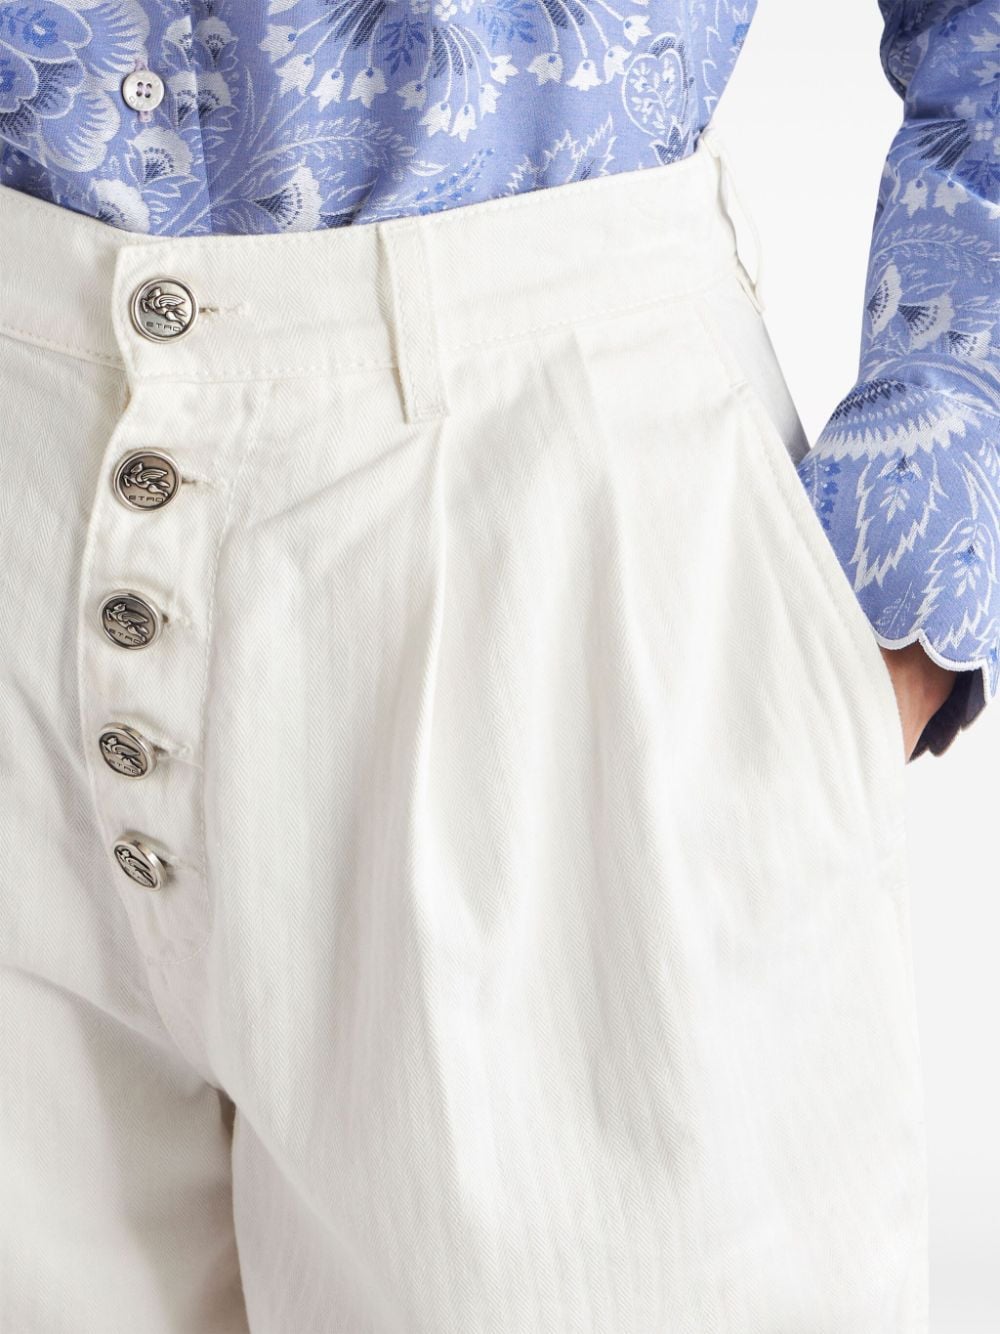 ETRO White High-Waisted Bermuda Shorts with Button Details